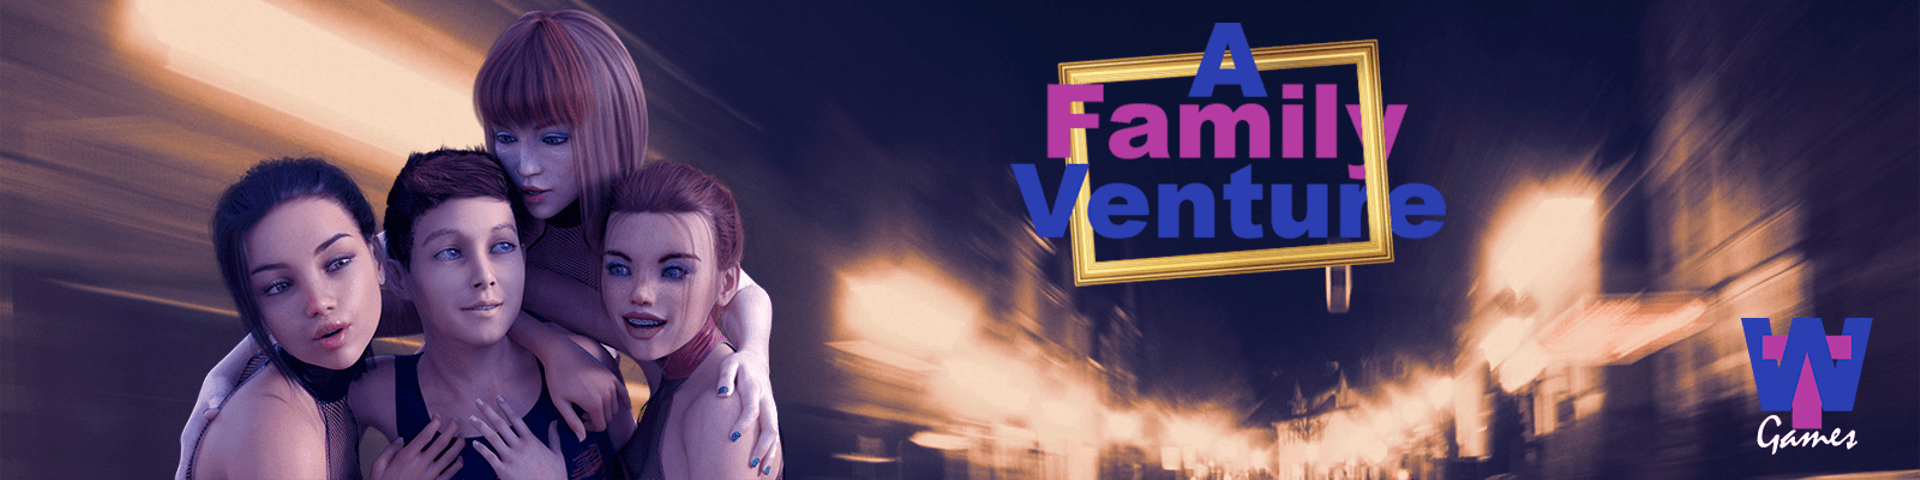 A Family Venture – Version 0.05b - Patreon incest adult game 4